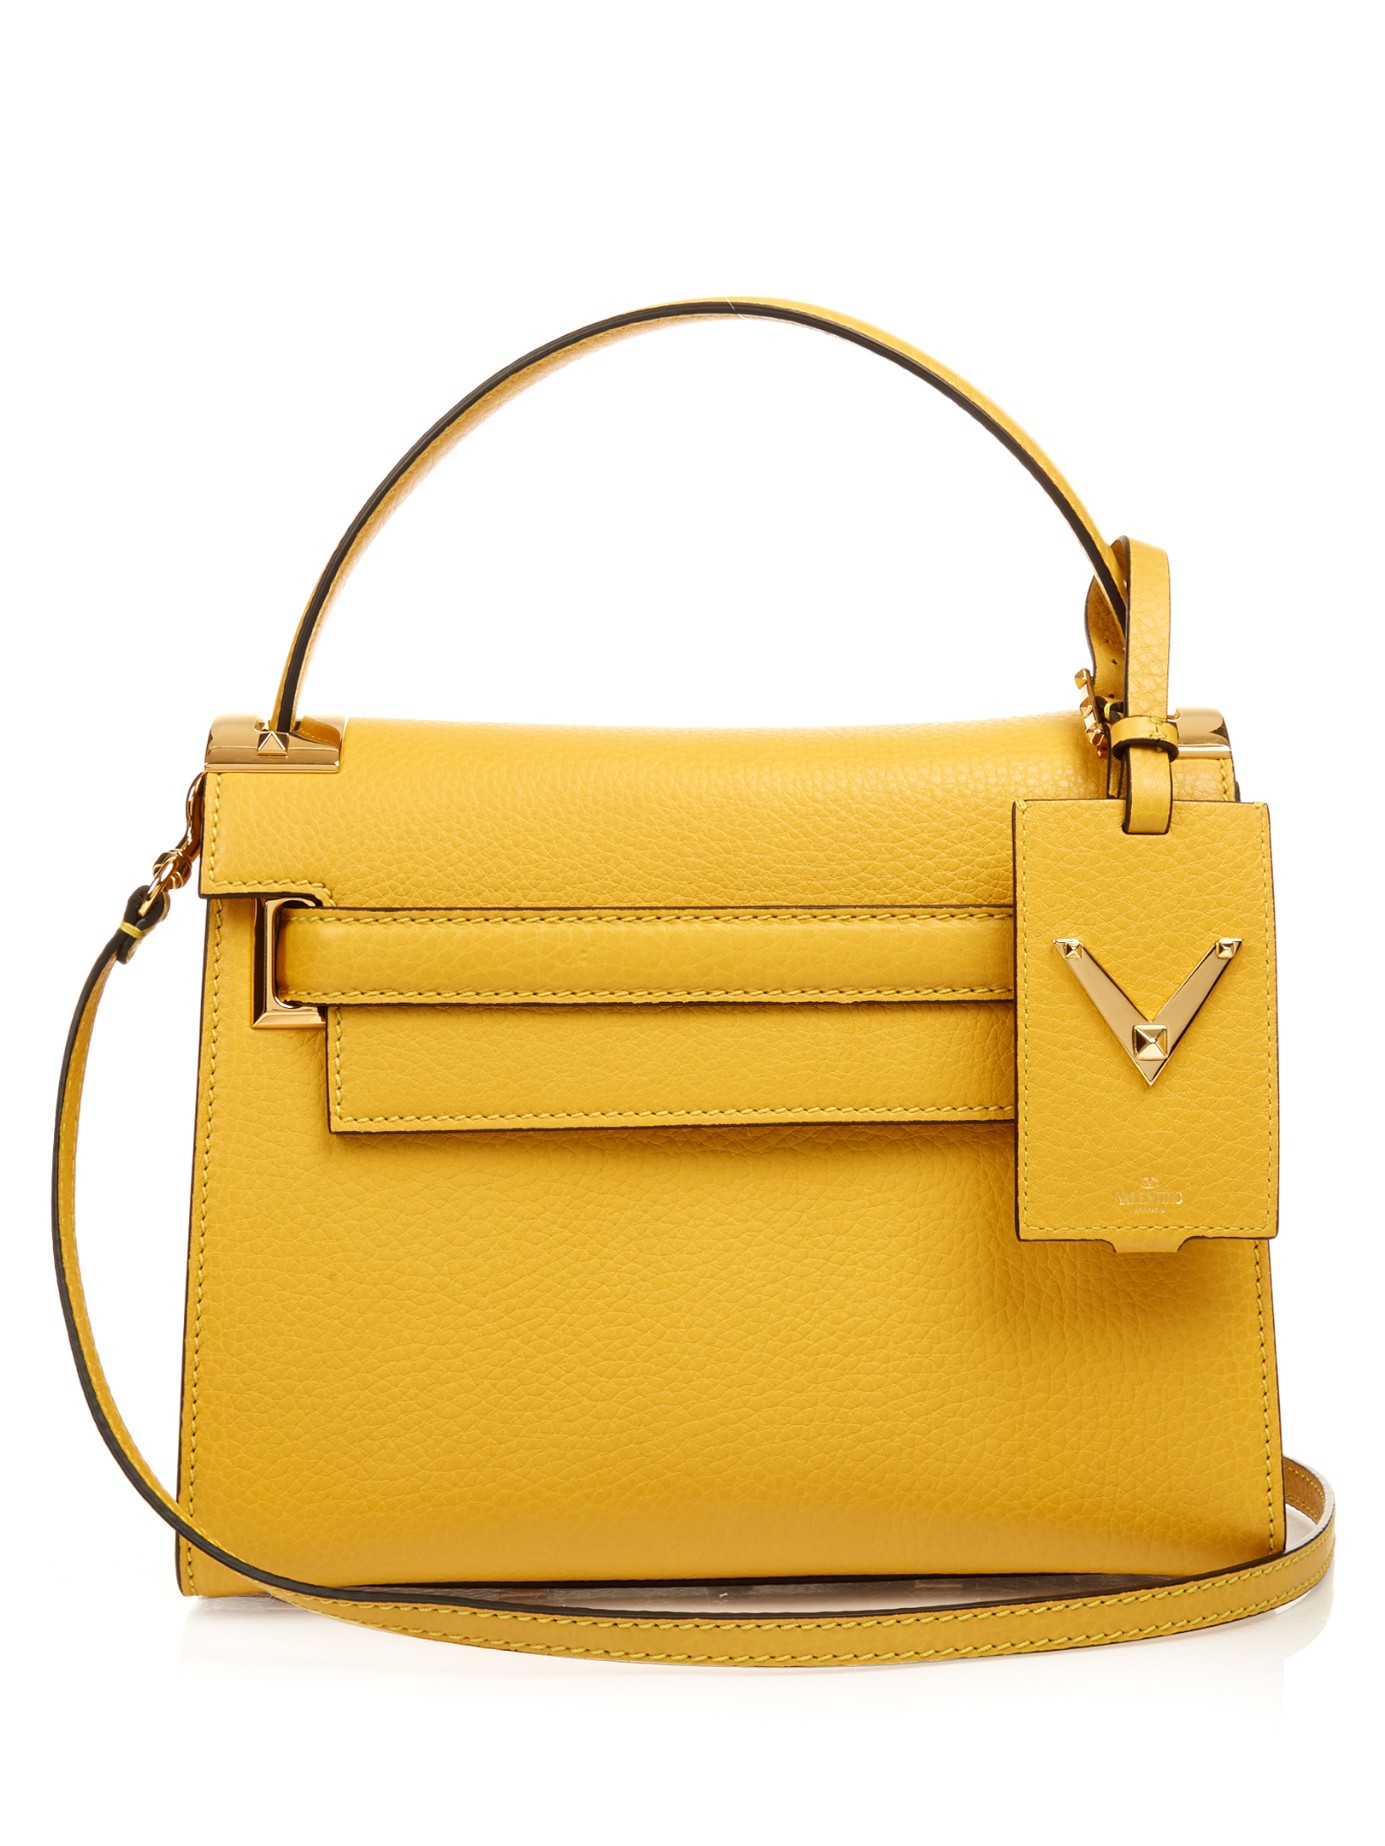 Valentino My Rockstud Small Leather Bag in Yellow | Lyst